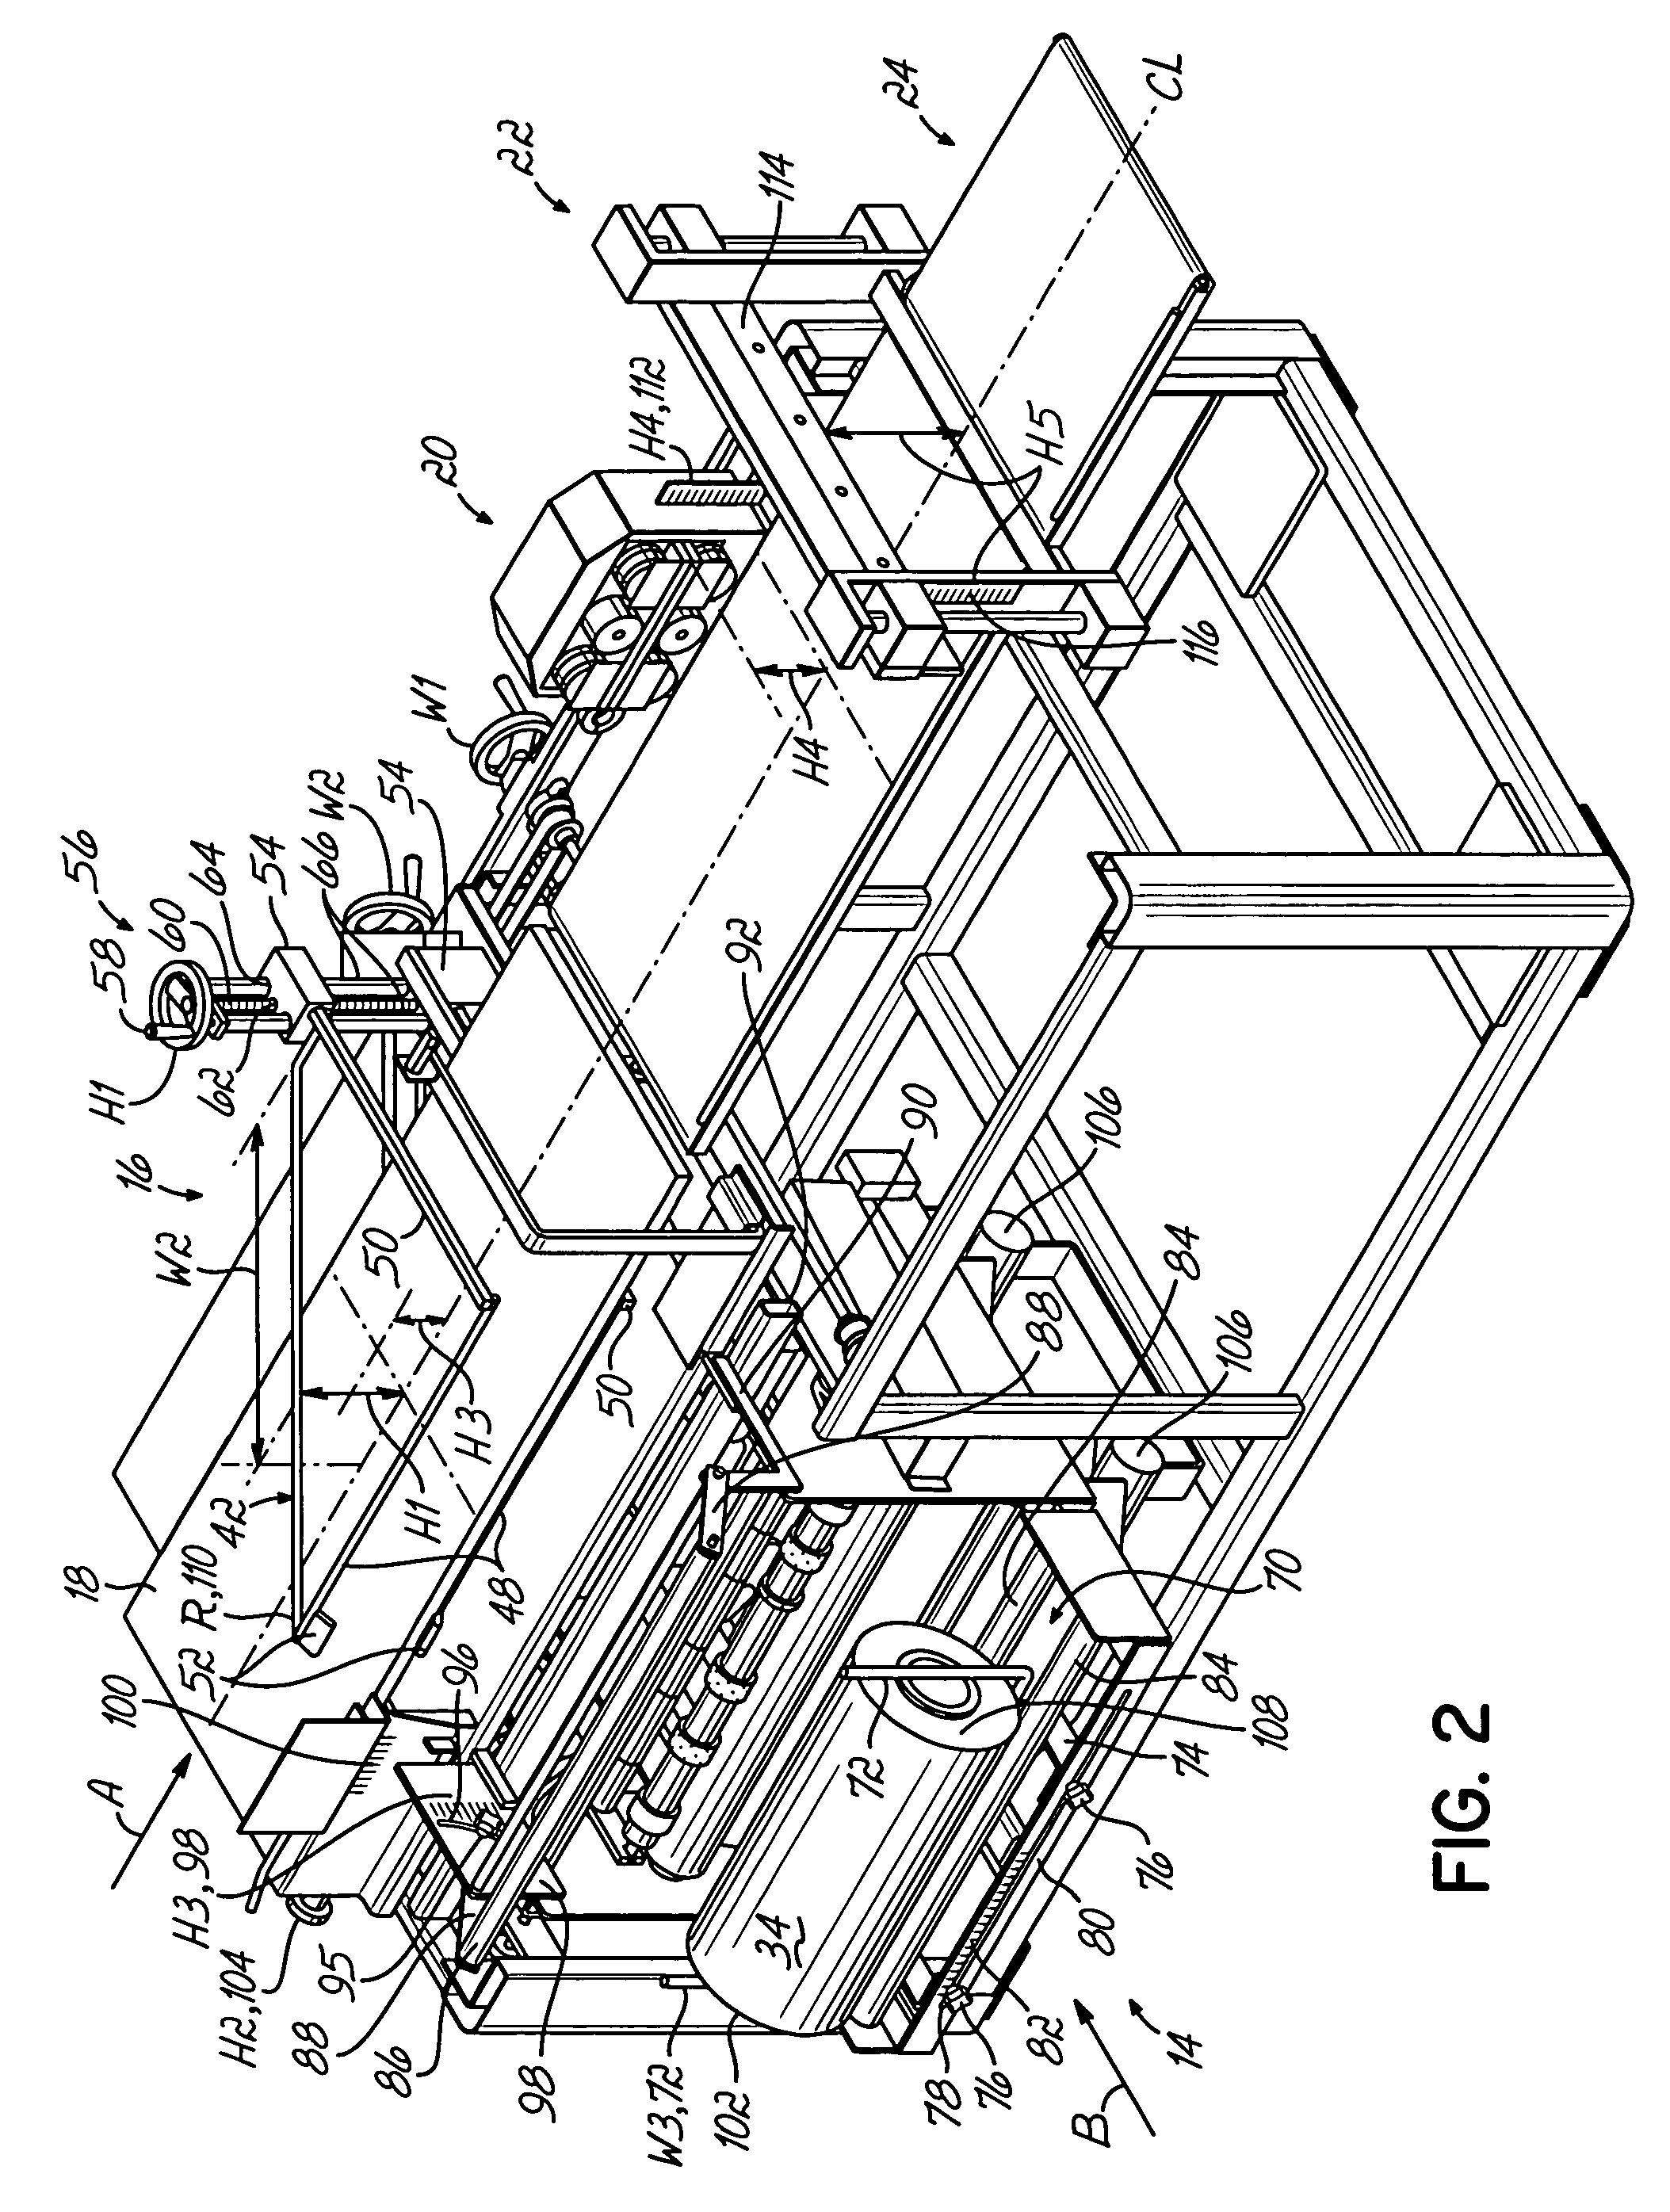 Calibrated shrink wrap packaging system and associated method